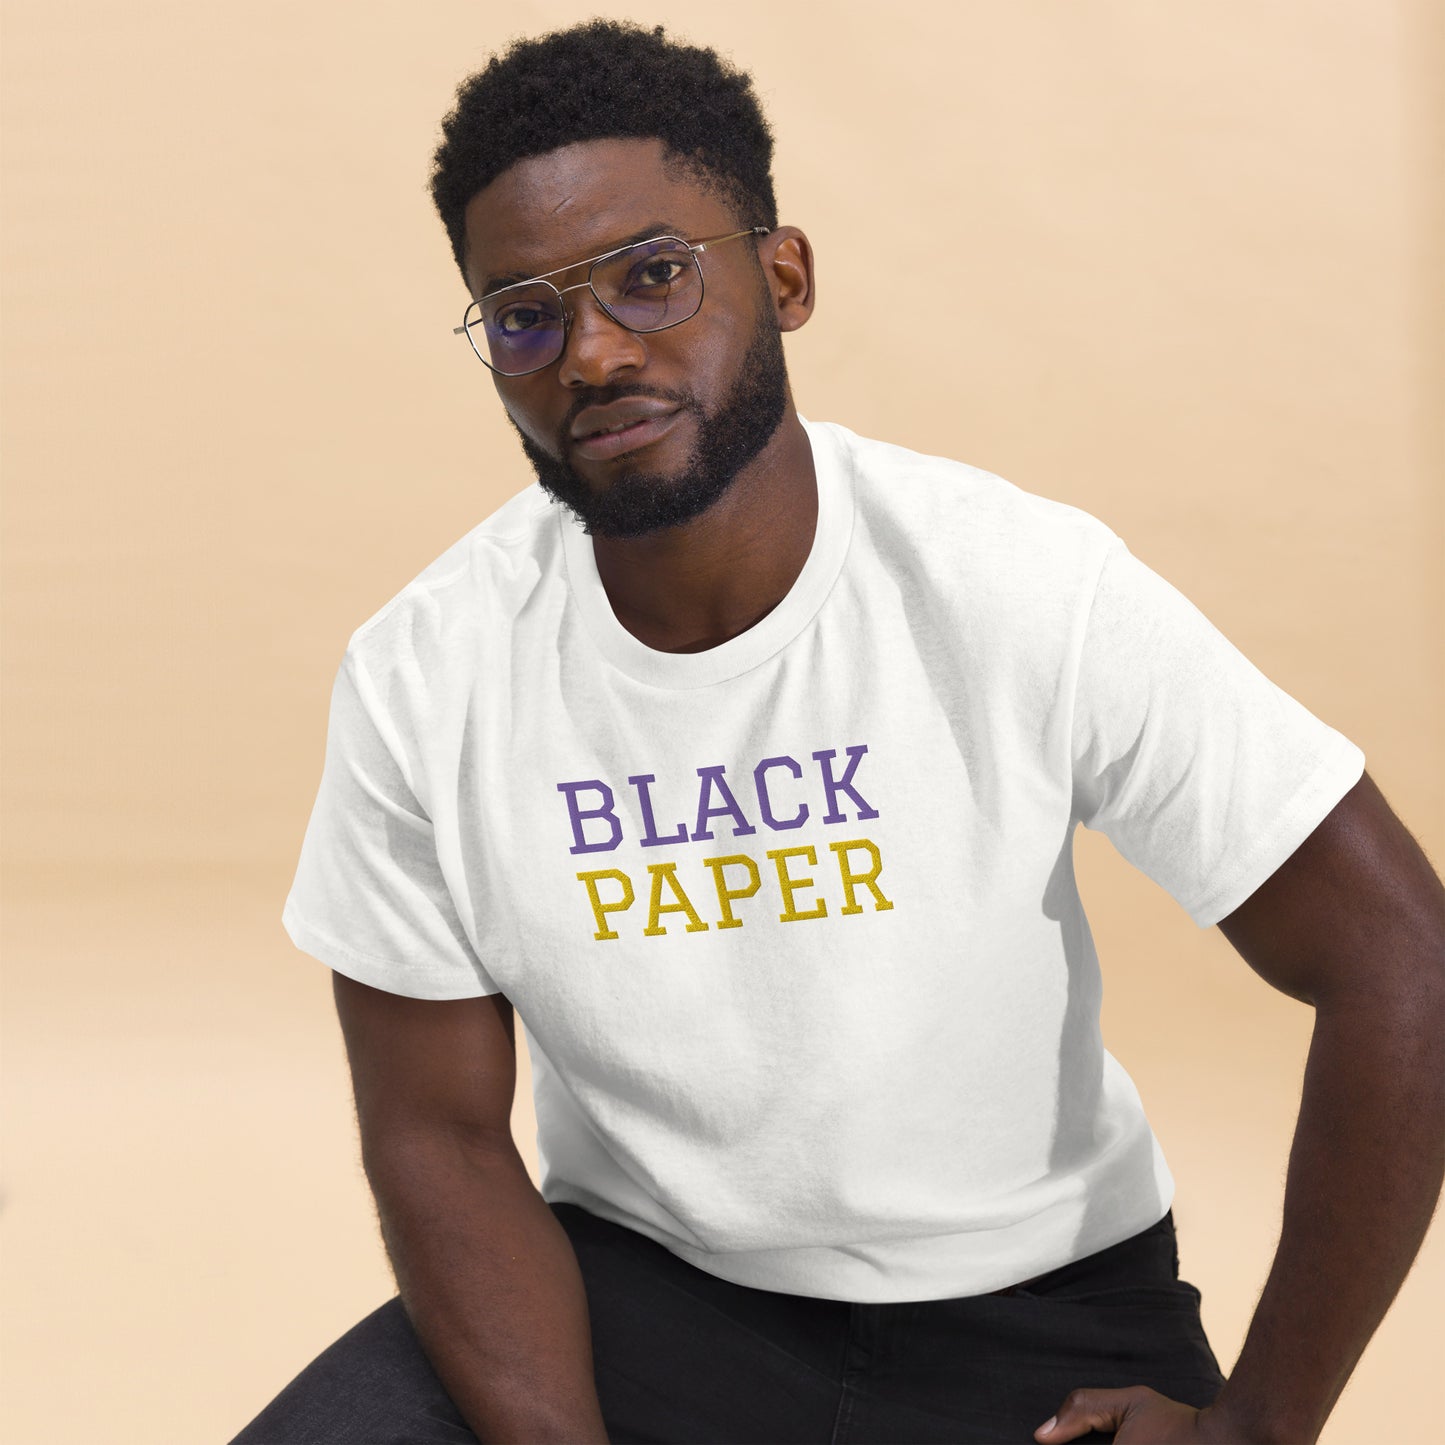 Purple & Gold COLLECTION - Classic Tee(Embroidered)